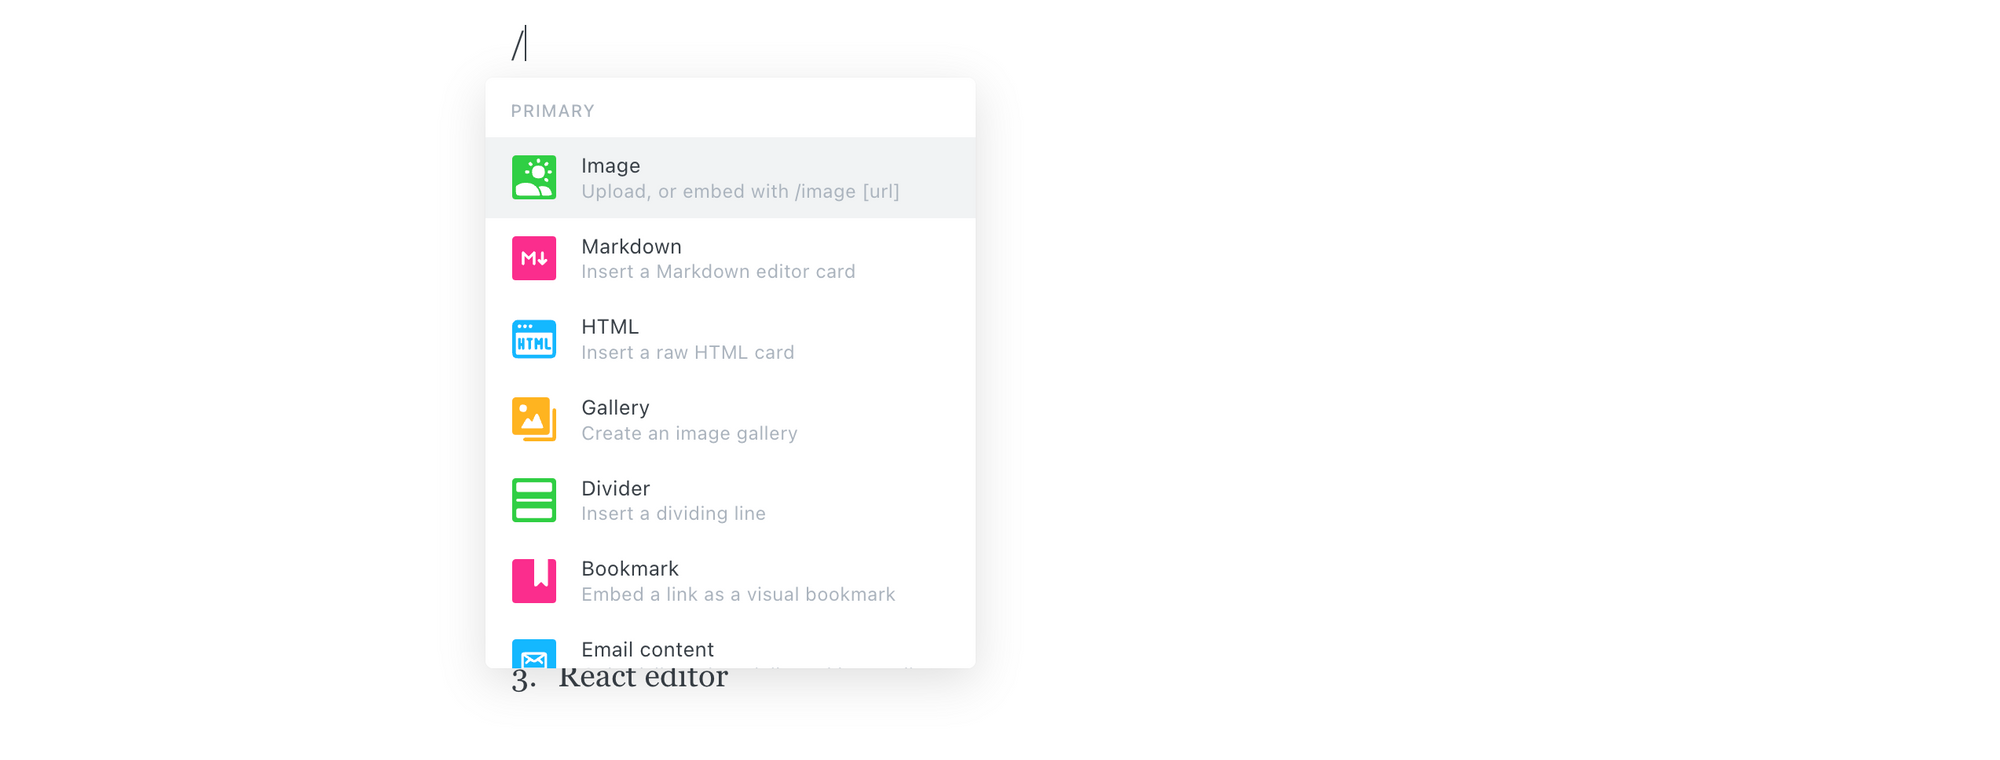 Mobiledoc Kit is a Framework-agnostic Library for Building Structured Editable Content